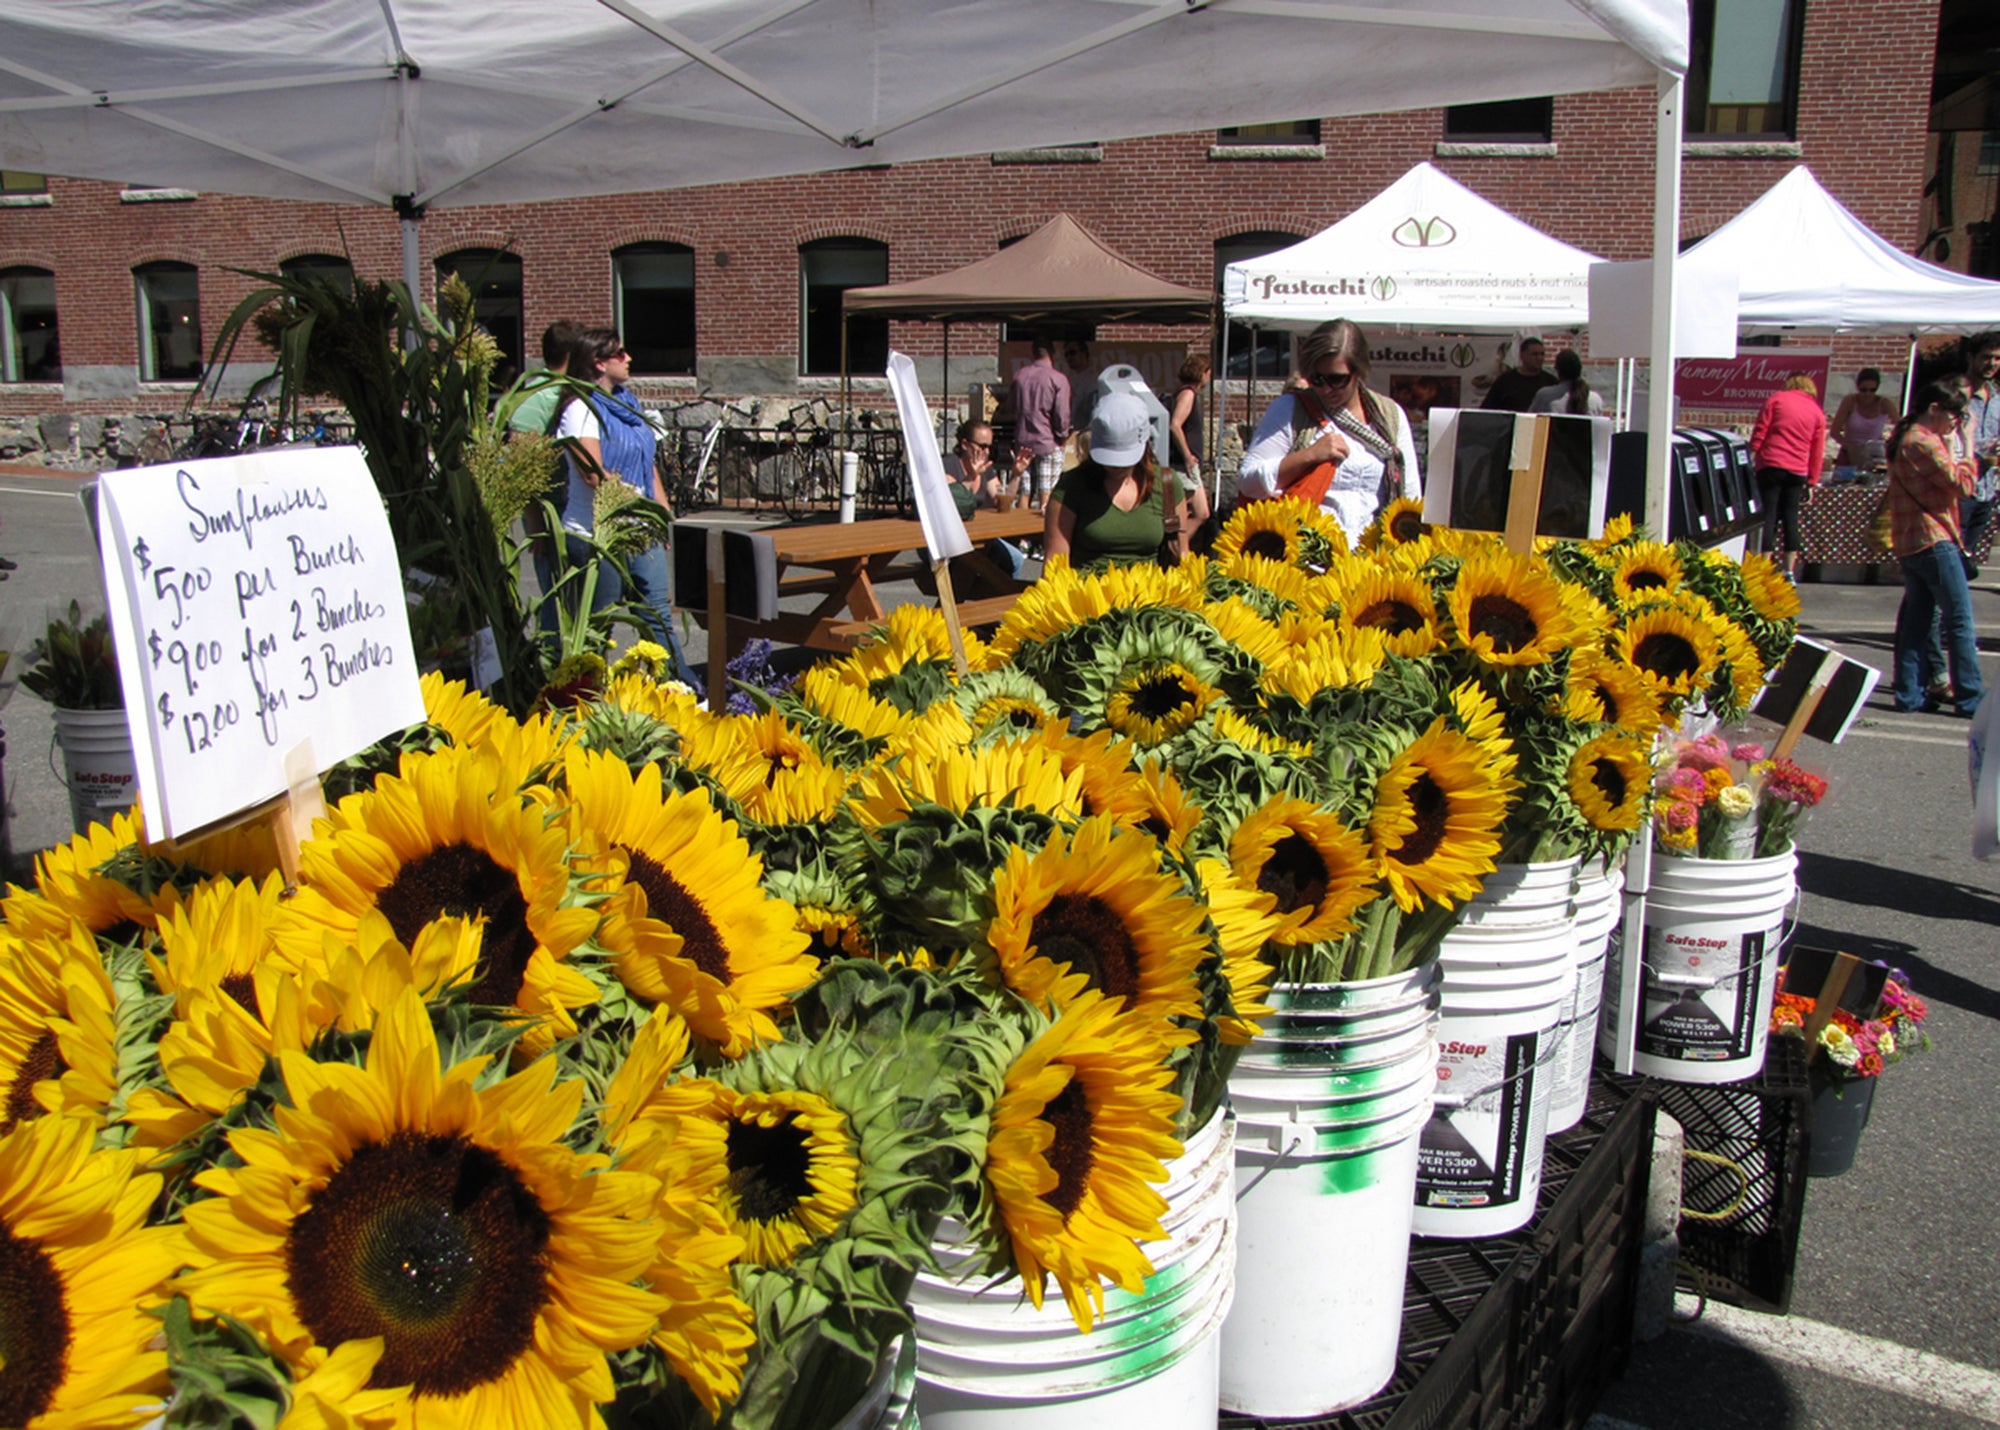 Where to find farmers' markets in and around Boston